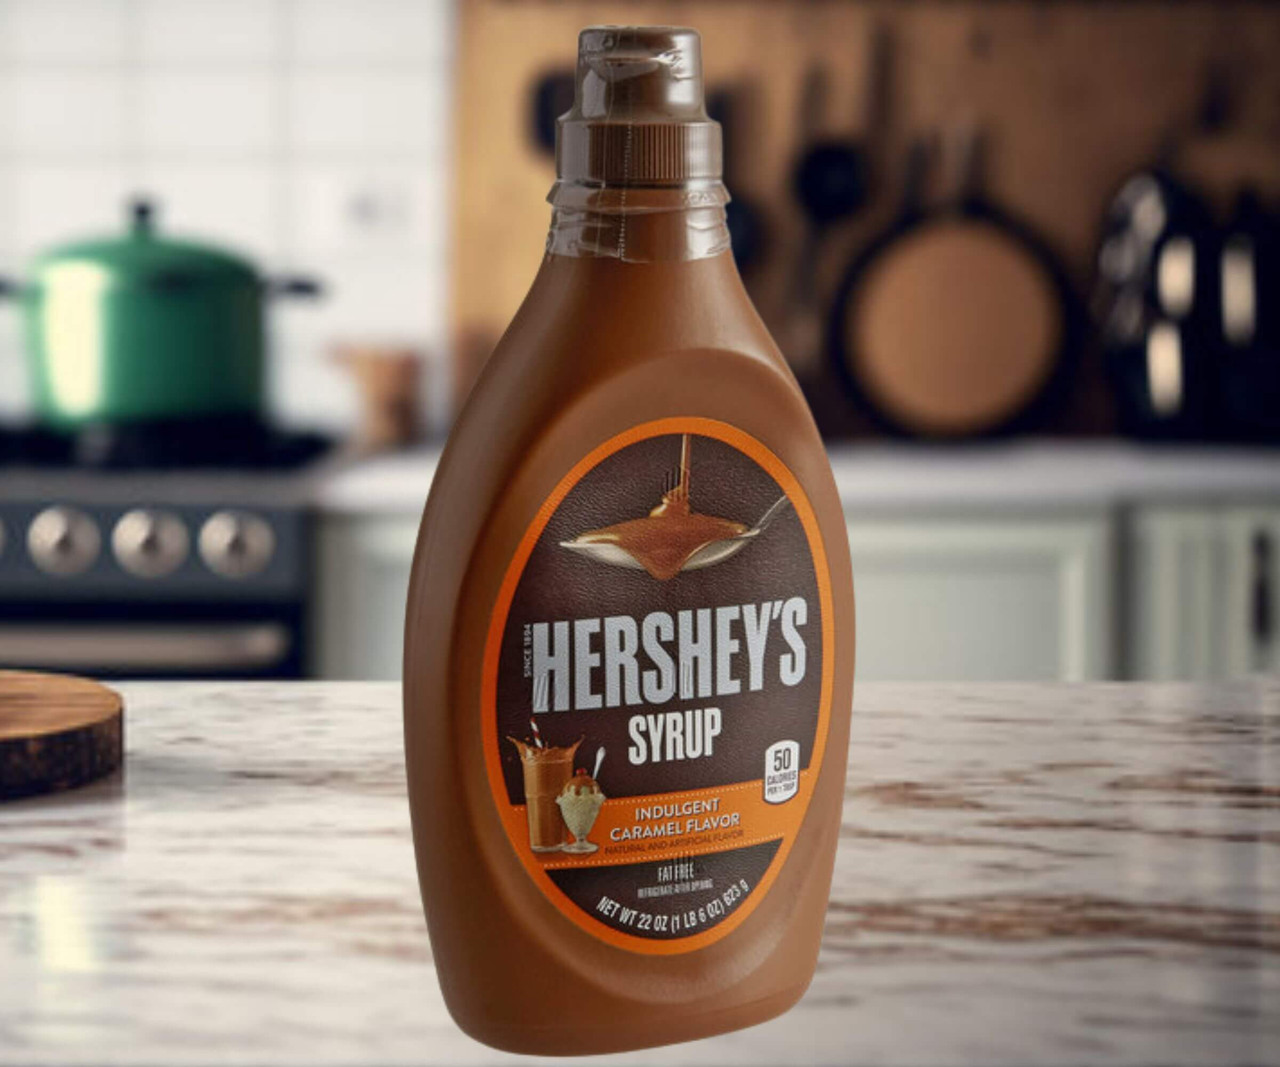 chicken pieces - HERSHEY'S Caramel Syrup 22 oz. | 1.36 LBS